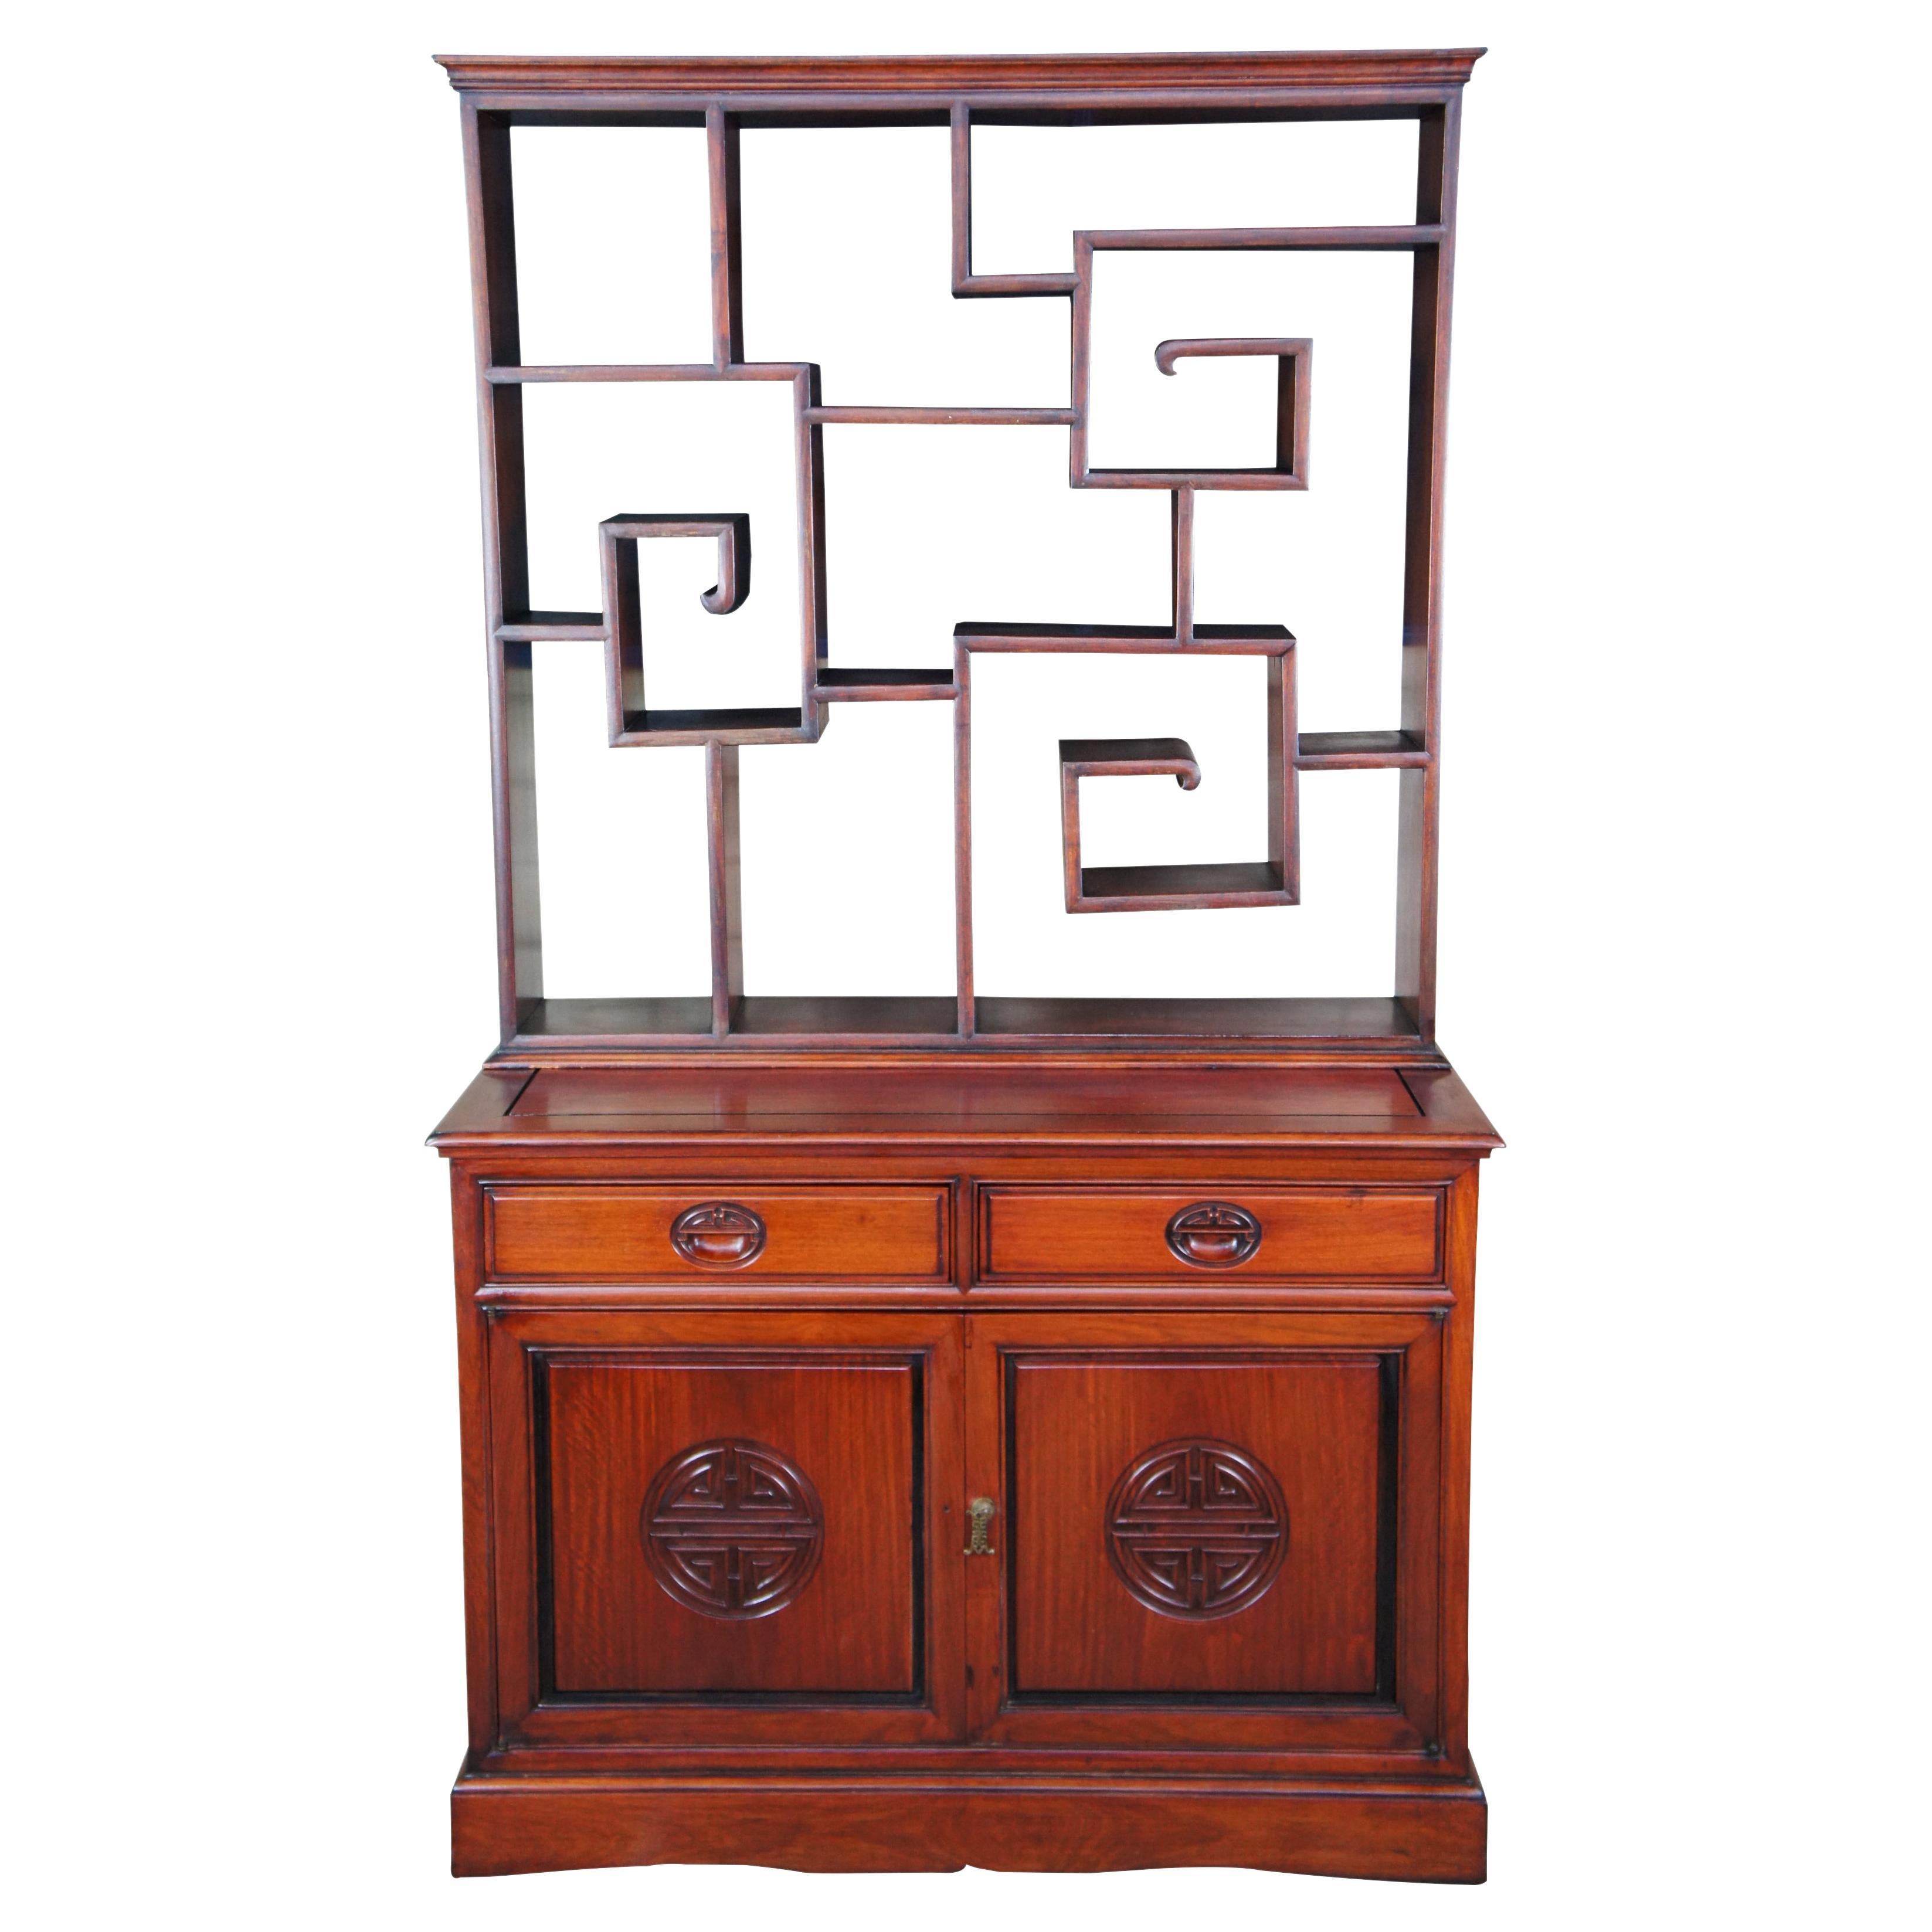 Antique Chinese Chinoiserie Ming Rosewood etagere cabinet. Made of solid rosewood featuring tiered upper bookcase curio shelving with two lower drawers and one cabinet.

Measures: 19